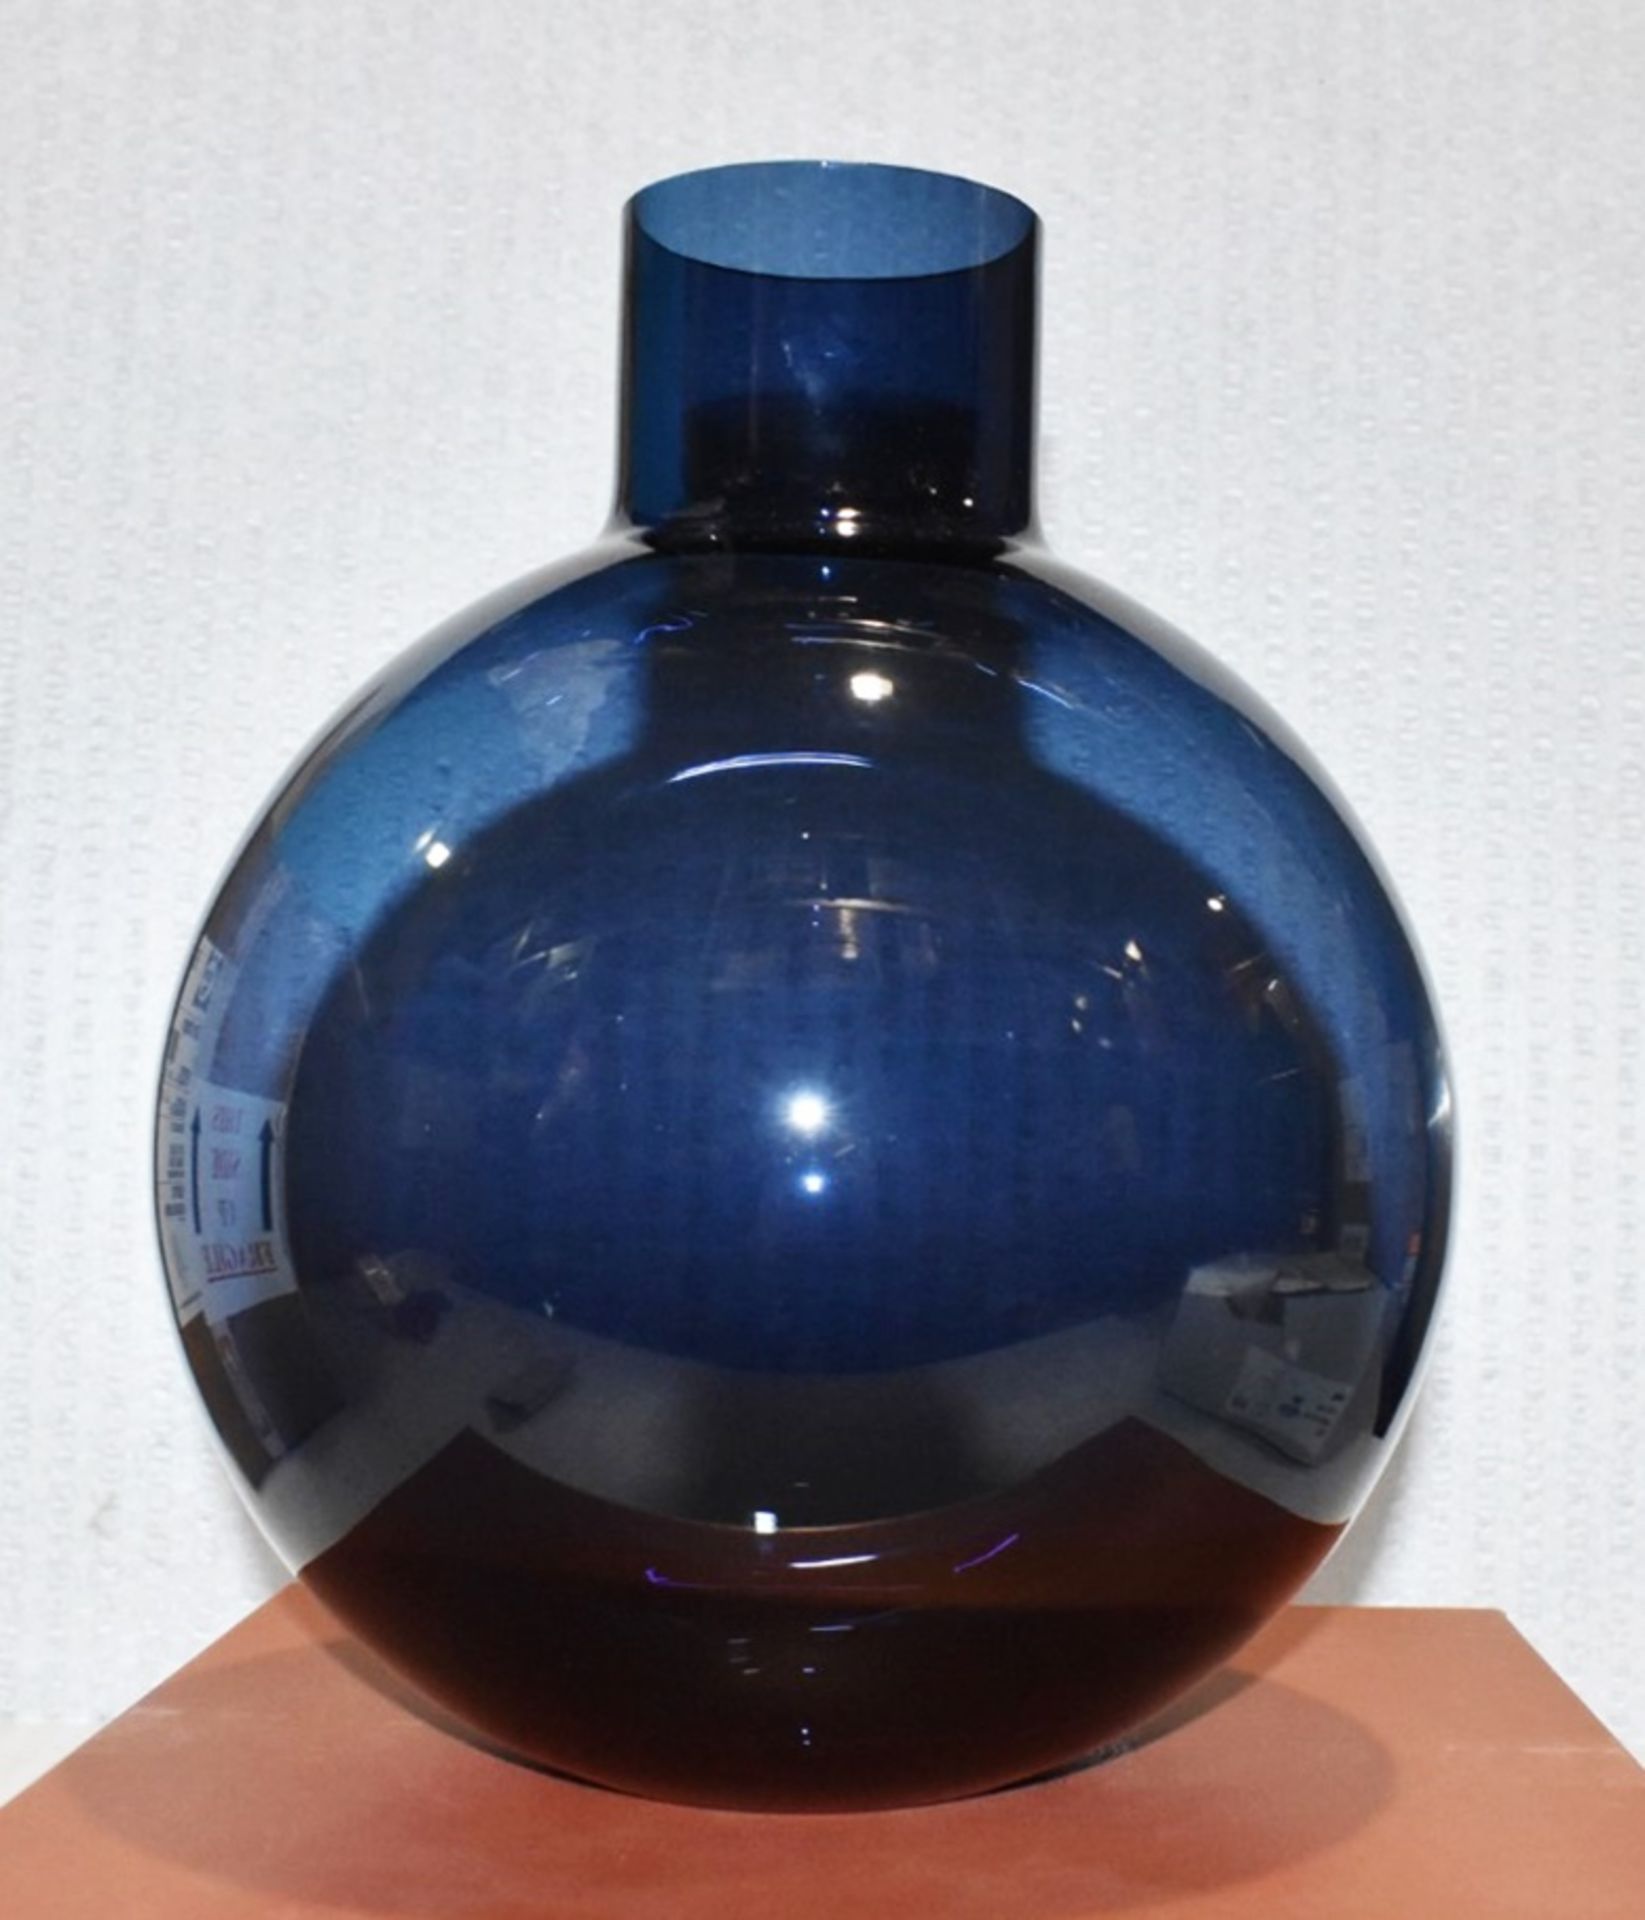 1 x POLTRONA FRAU 'Pallo Pot' High Quality Blown Glass Vase in Midnight Blue - RRP £1,080 *Signed* - Image 6 of 7